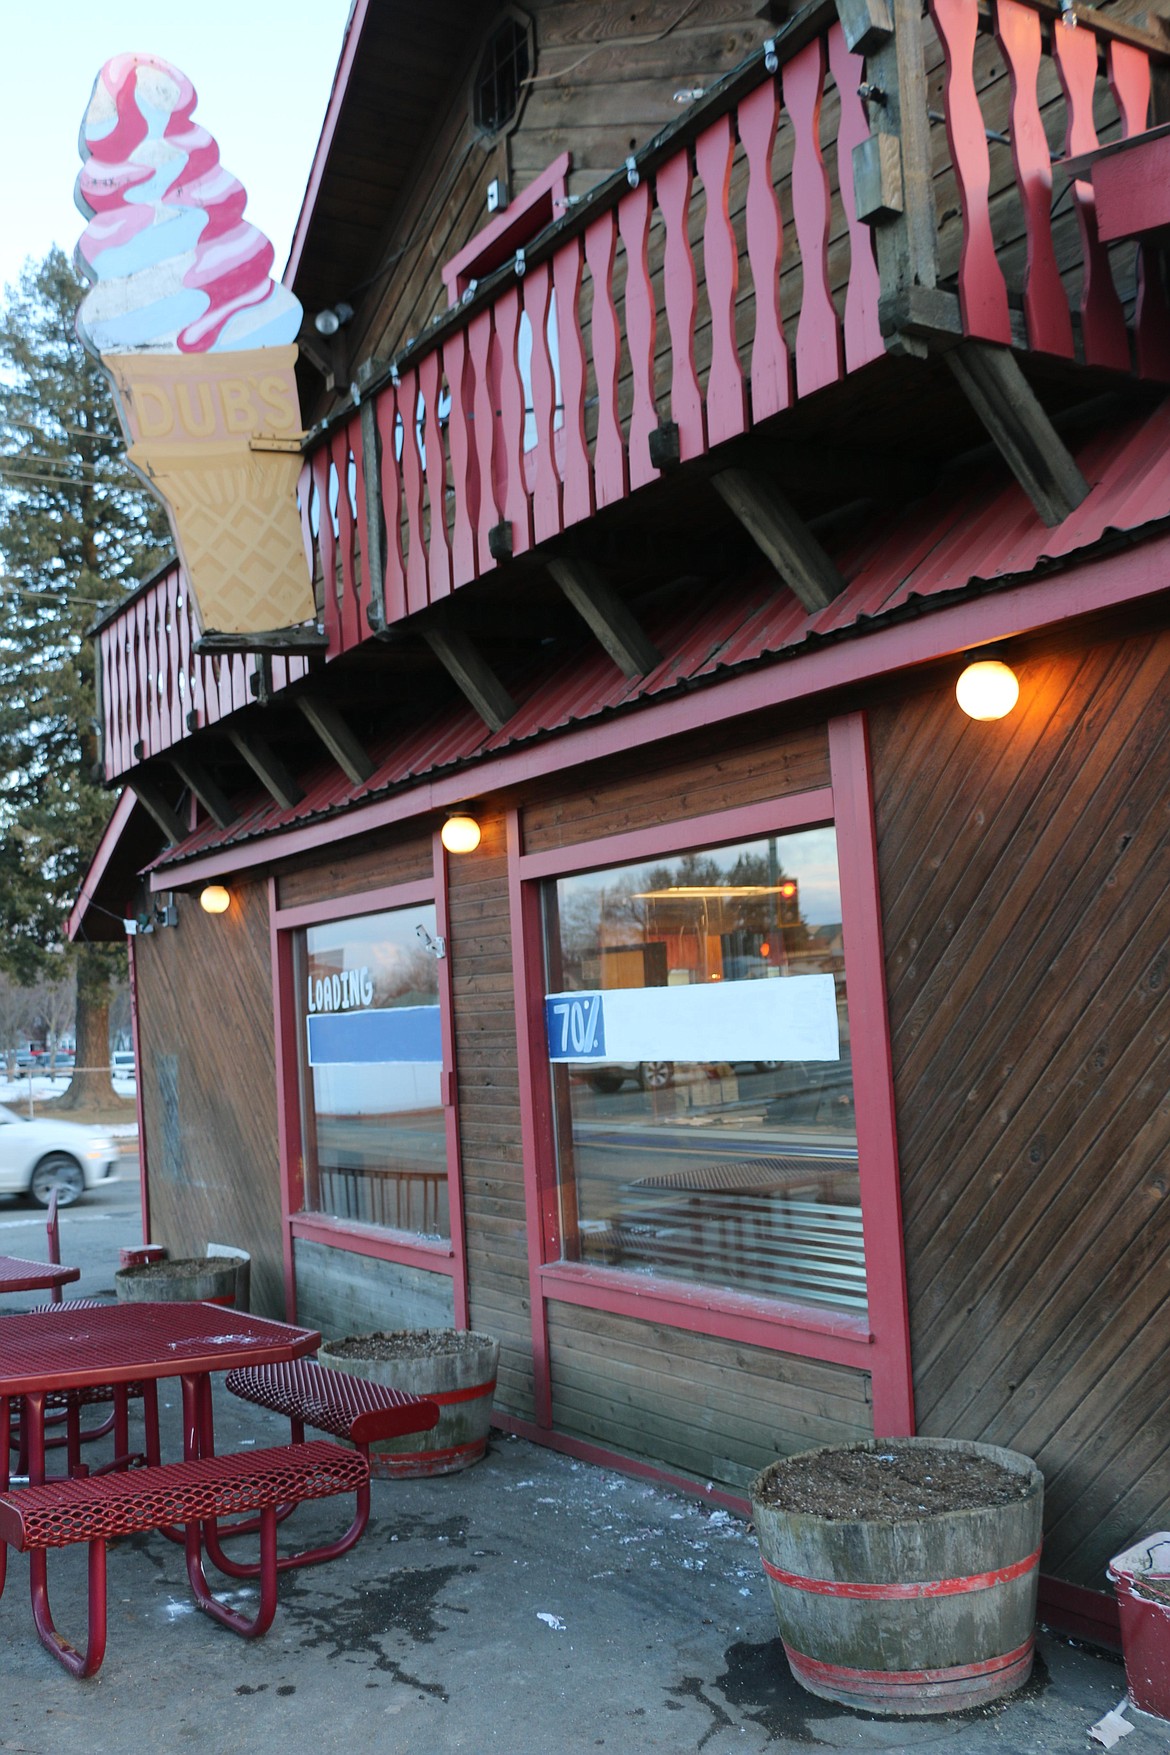 The Sandpoint City Council approved the purchase of the Dub's property from owners Marty and Jeralyn Mire at Wednesday's council meeting. The business will remain open and will be run by Ryan and Bethany Welsh, who eventually play to buy and relocate the iconic Sandpoint restaurant.